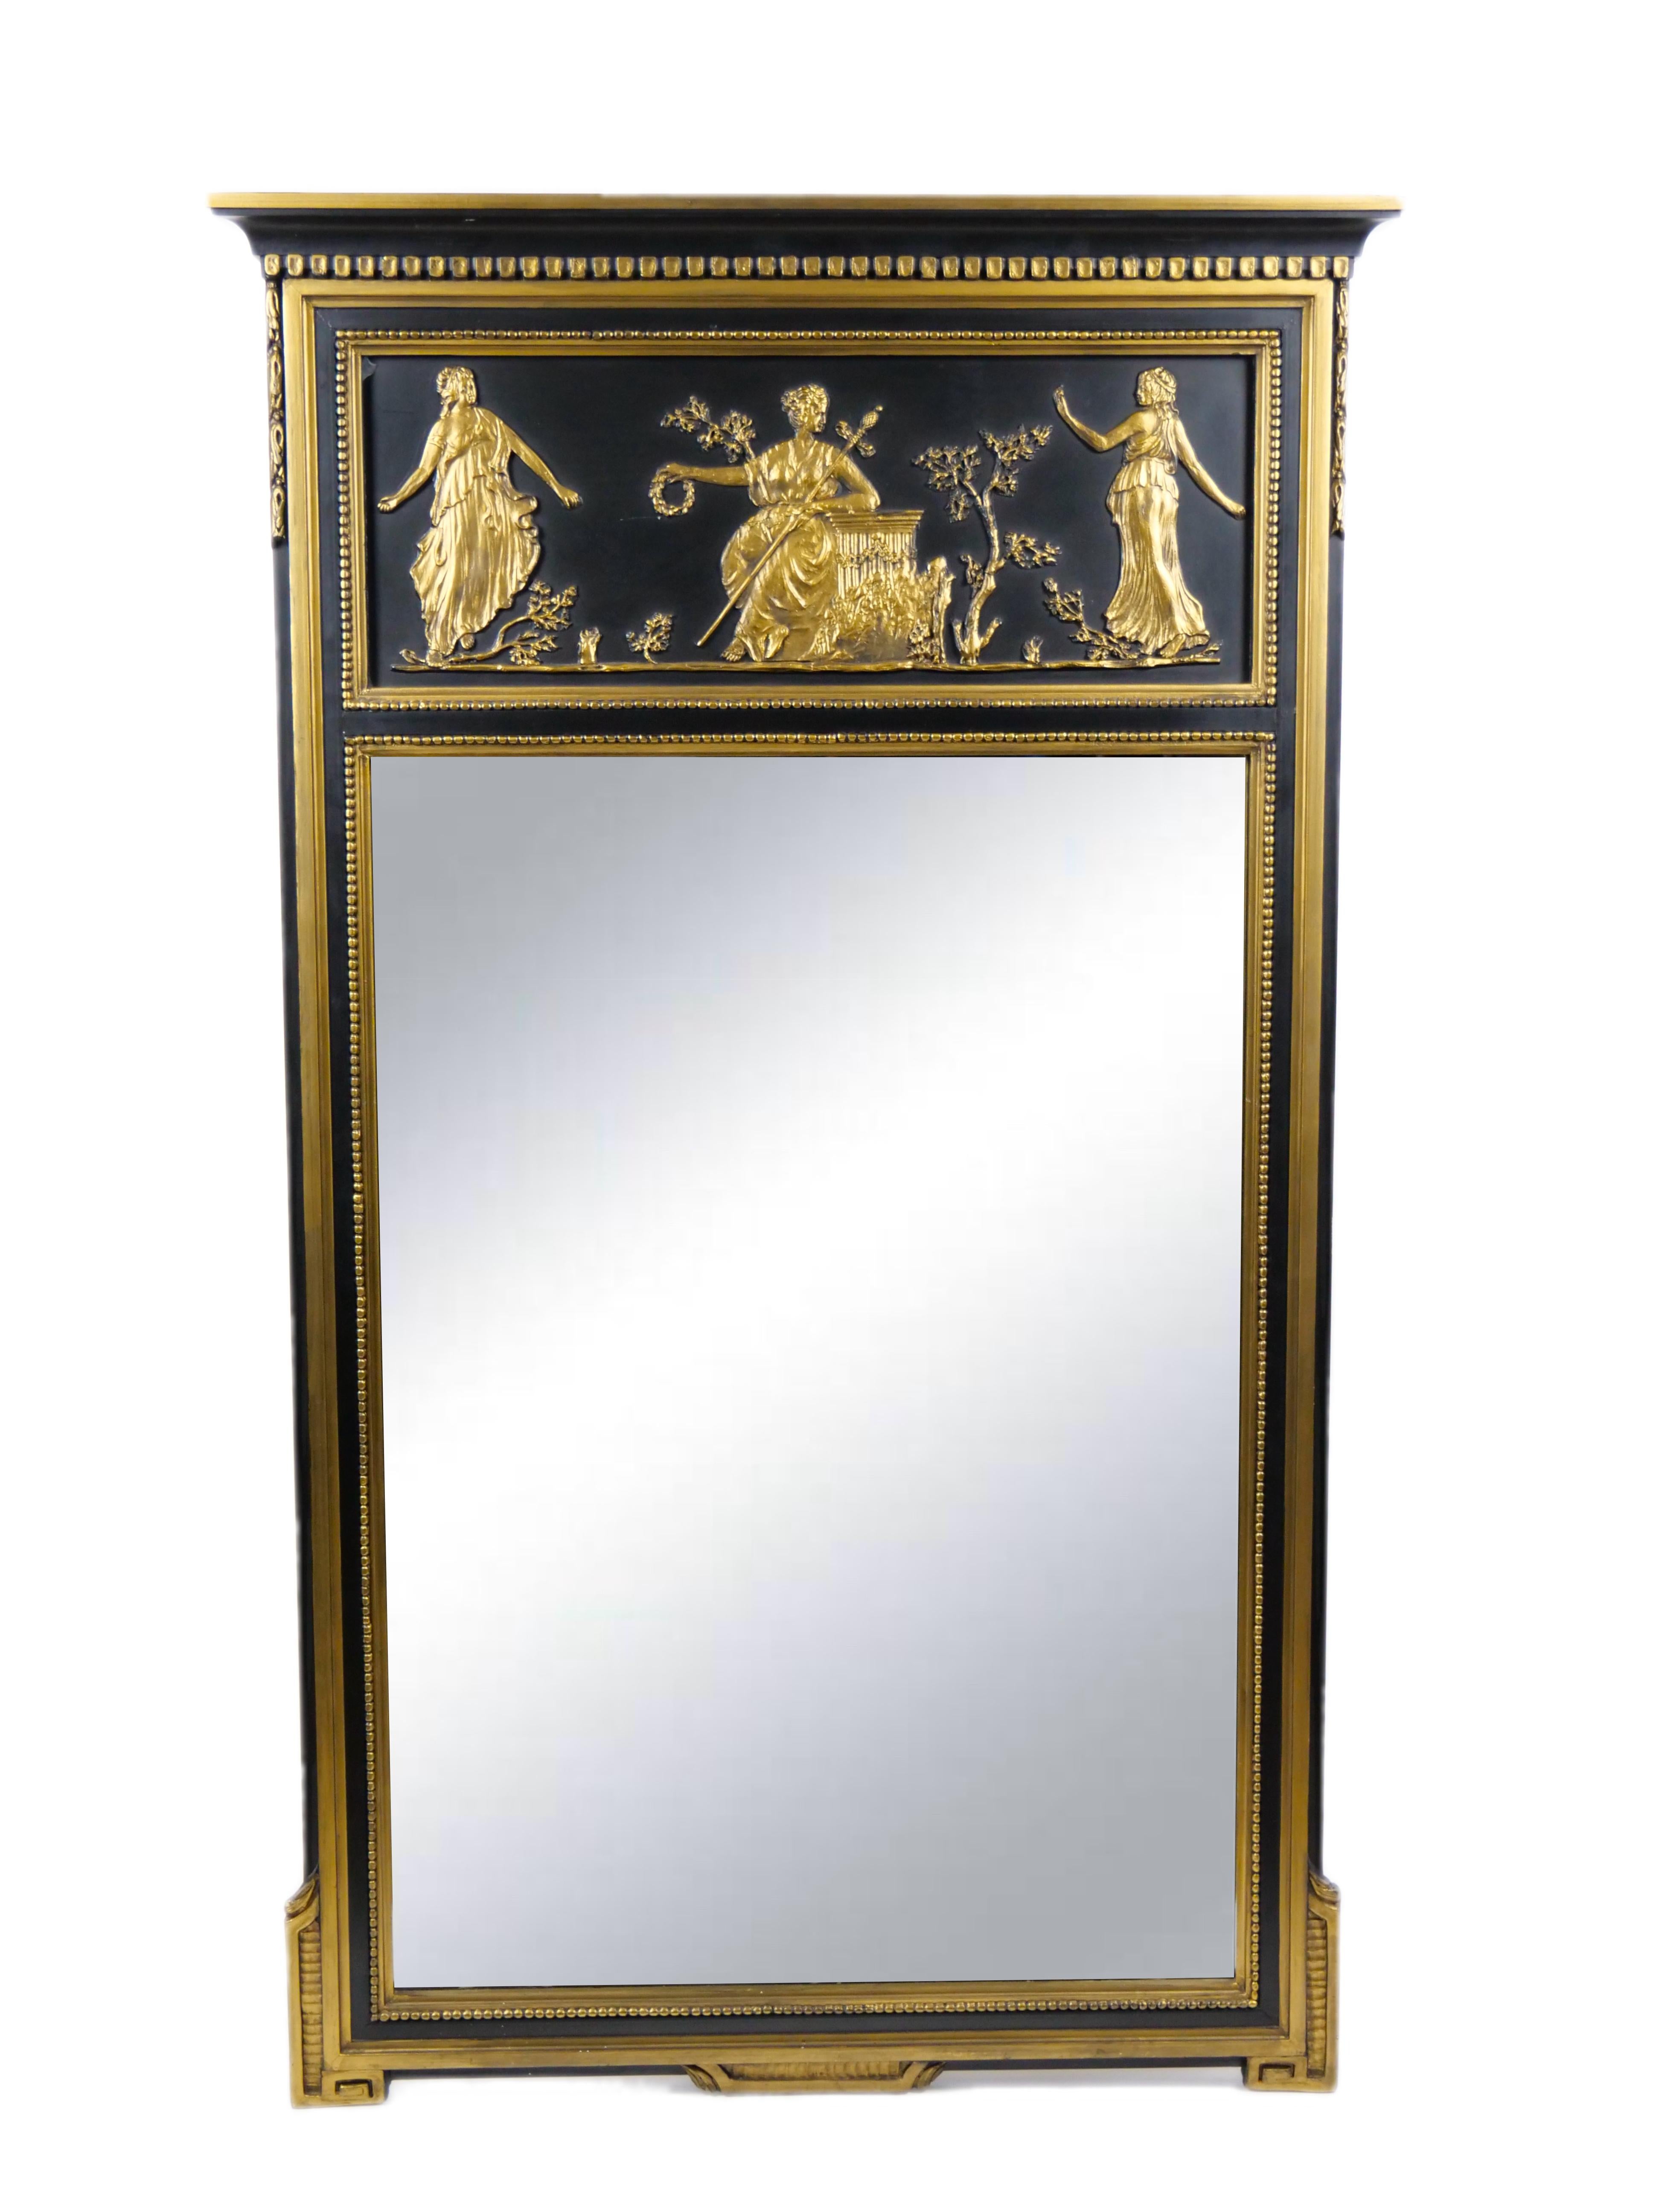 19th Century Giltwood  Painted / Decorated Top Trumeau Wall Mirror  For Sale 4